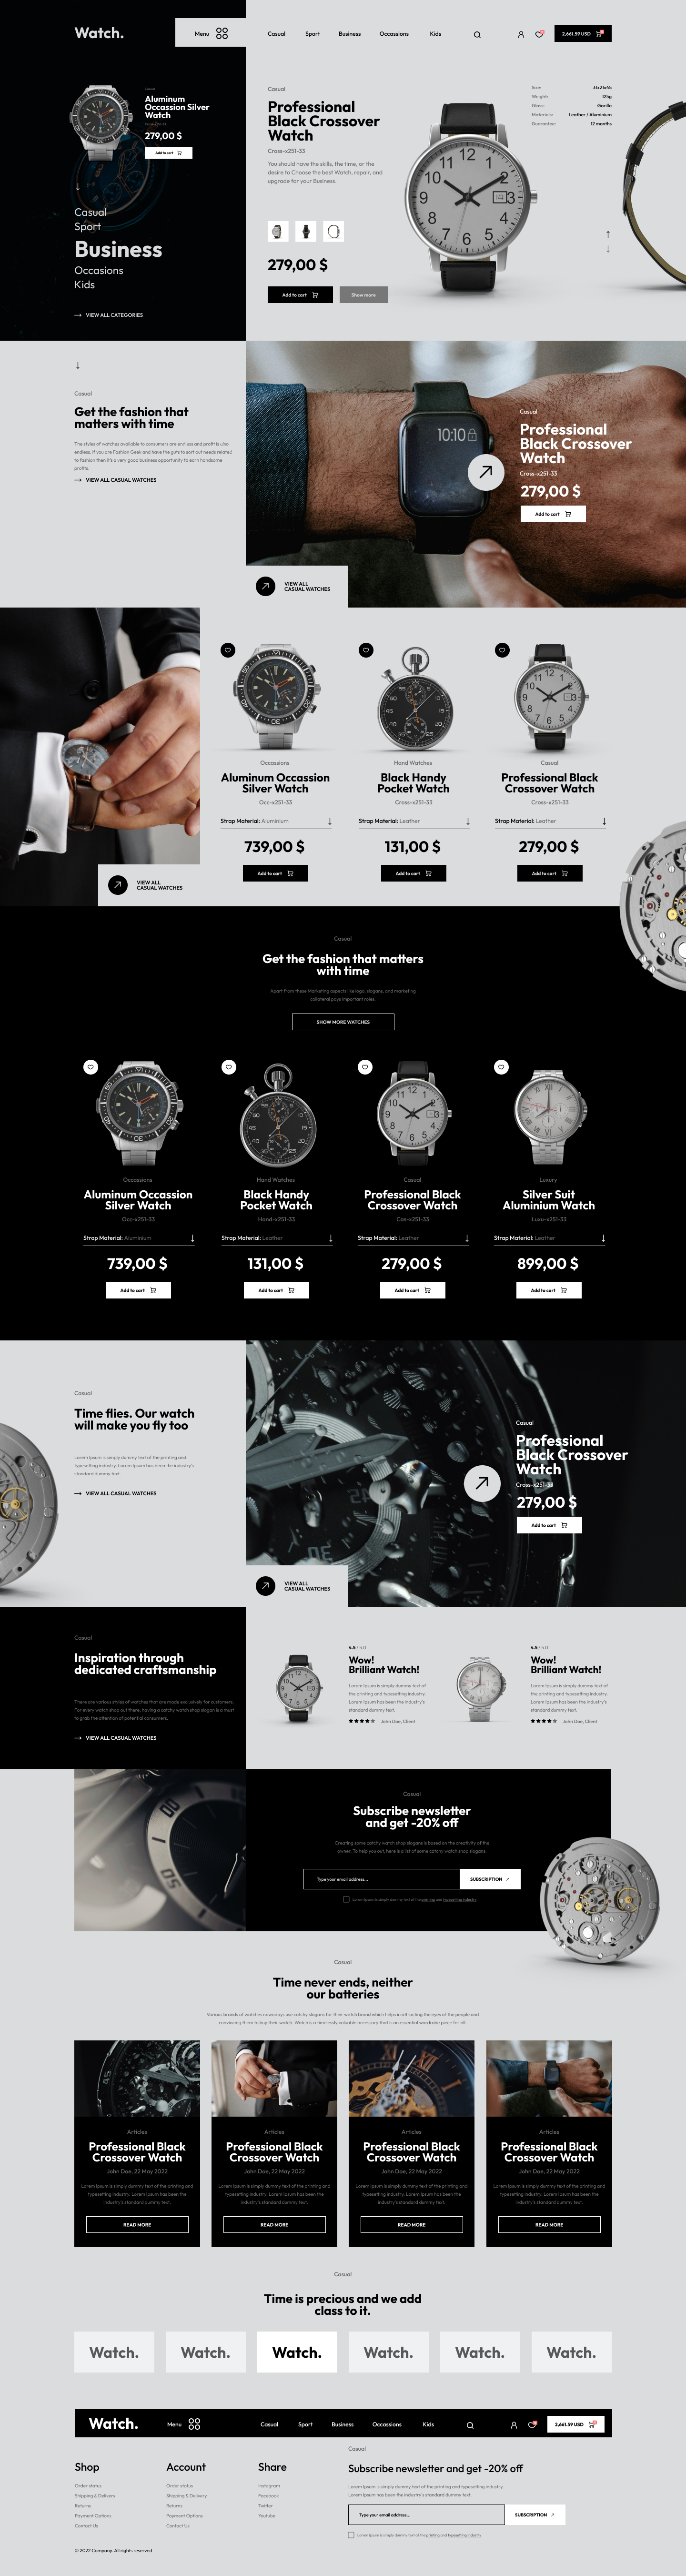 Watches Shopify Theme-WorkDo